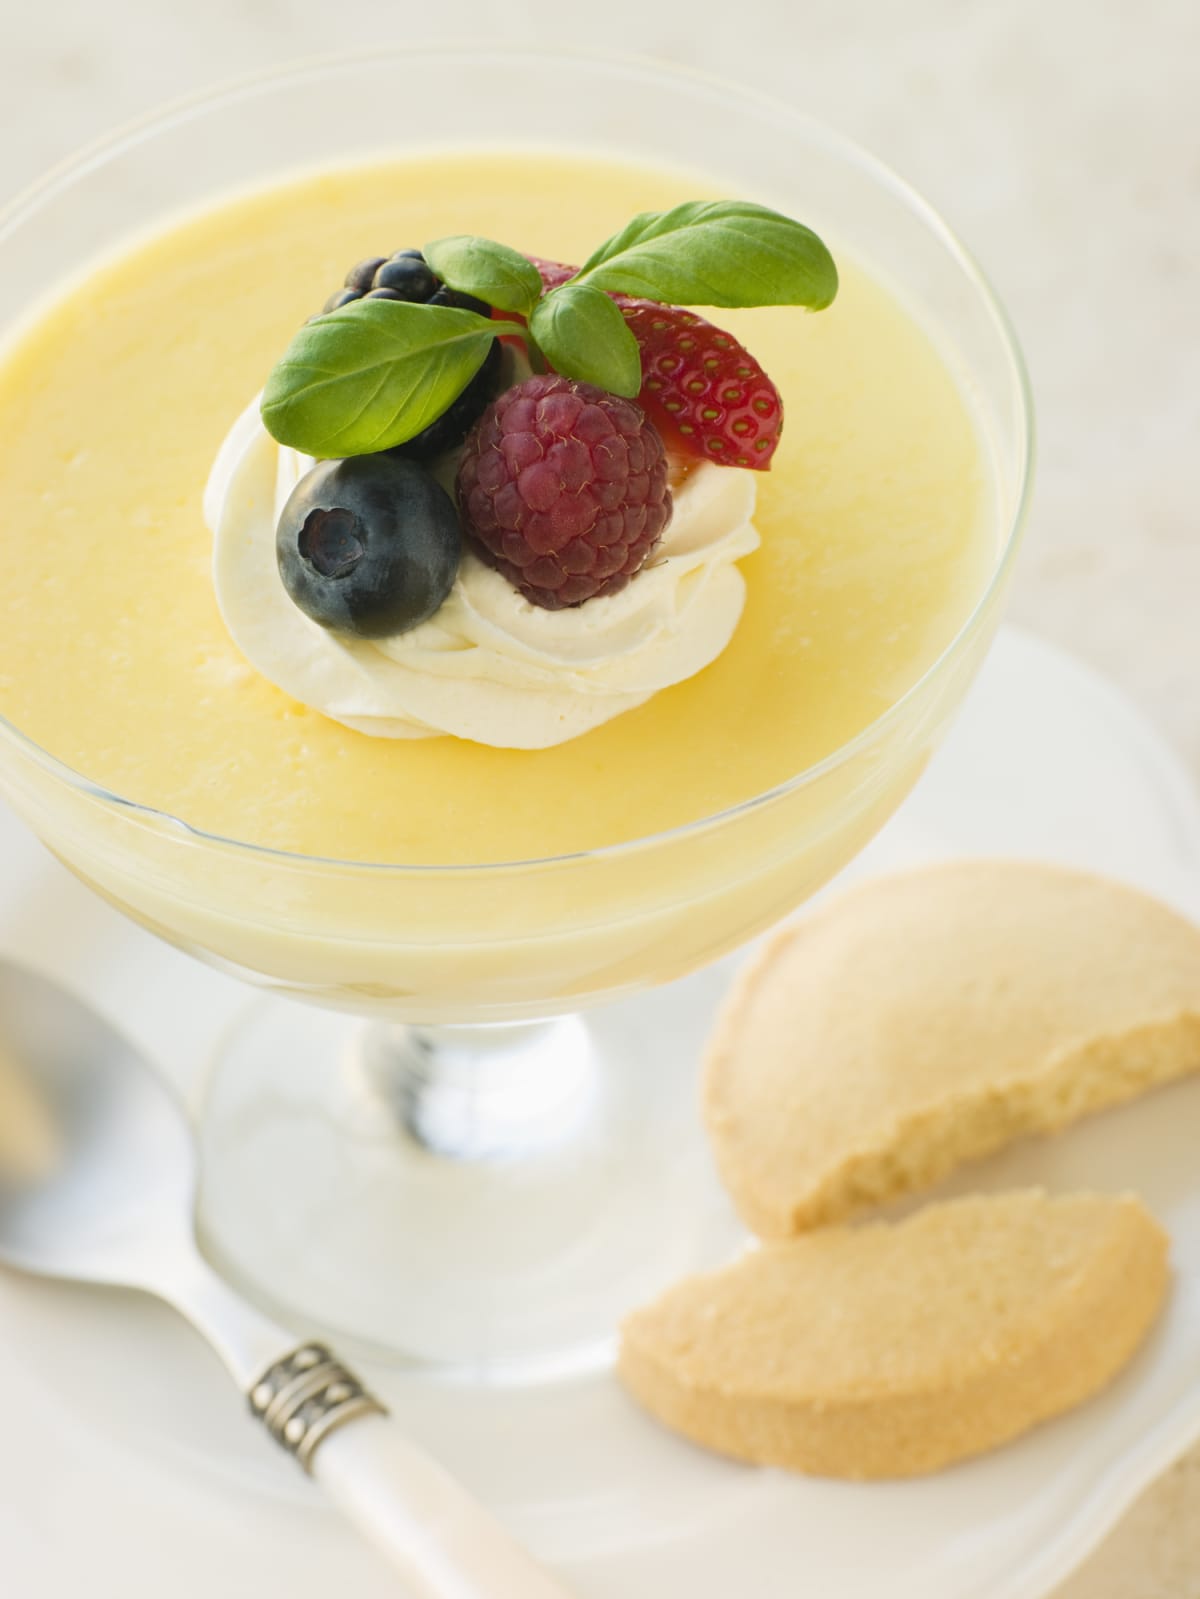 Lemon Posset with Shortbread Biscuits on the Side